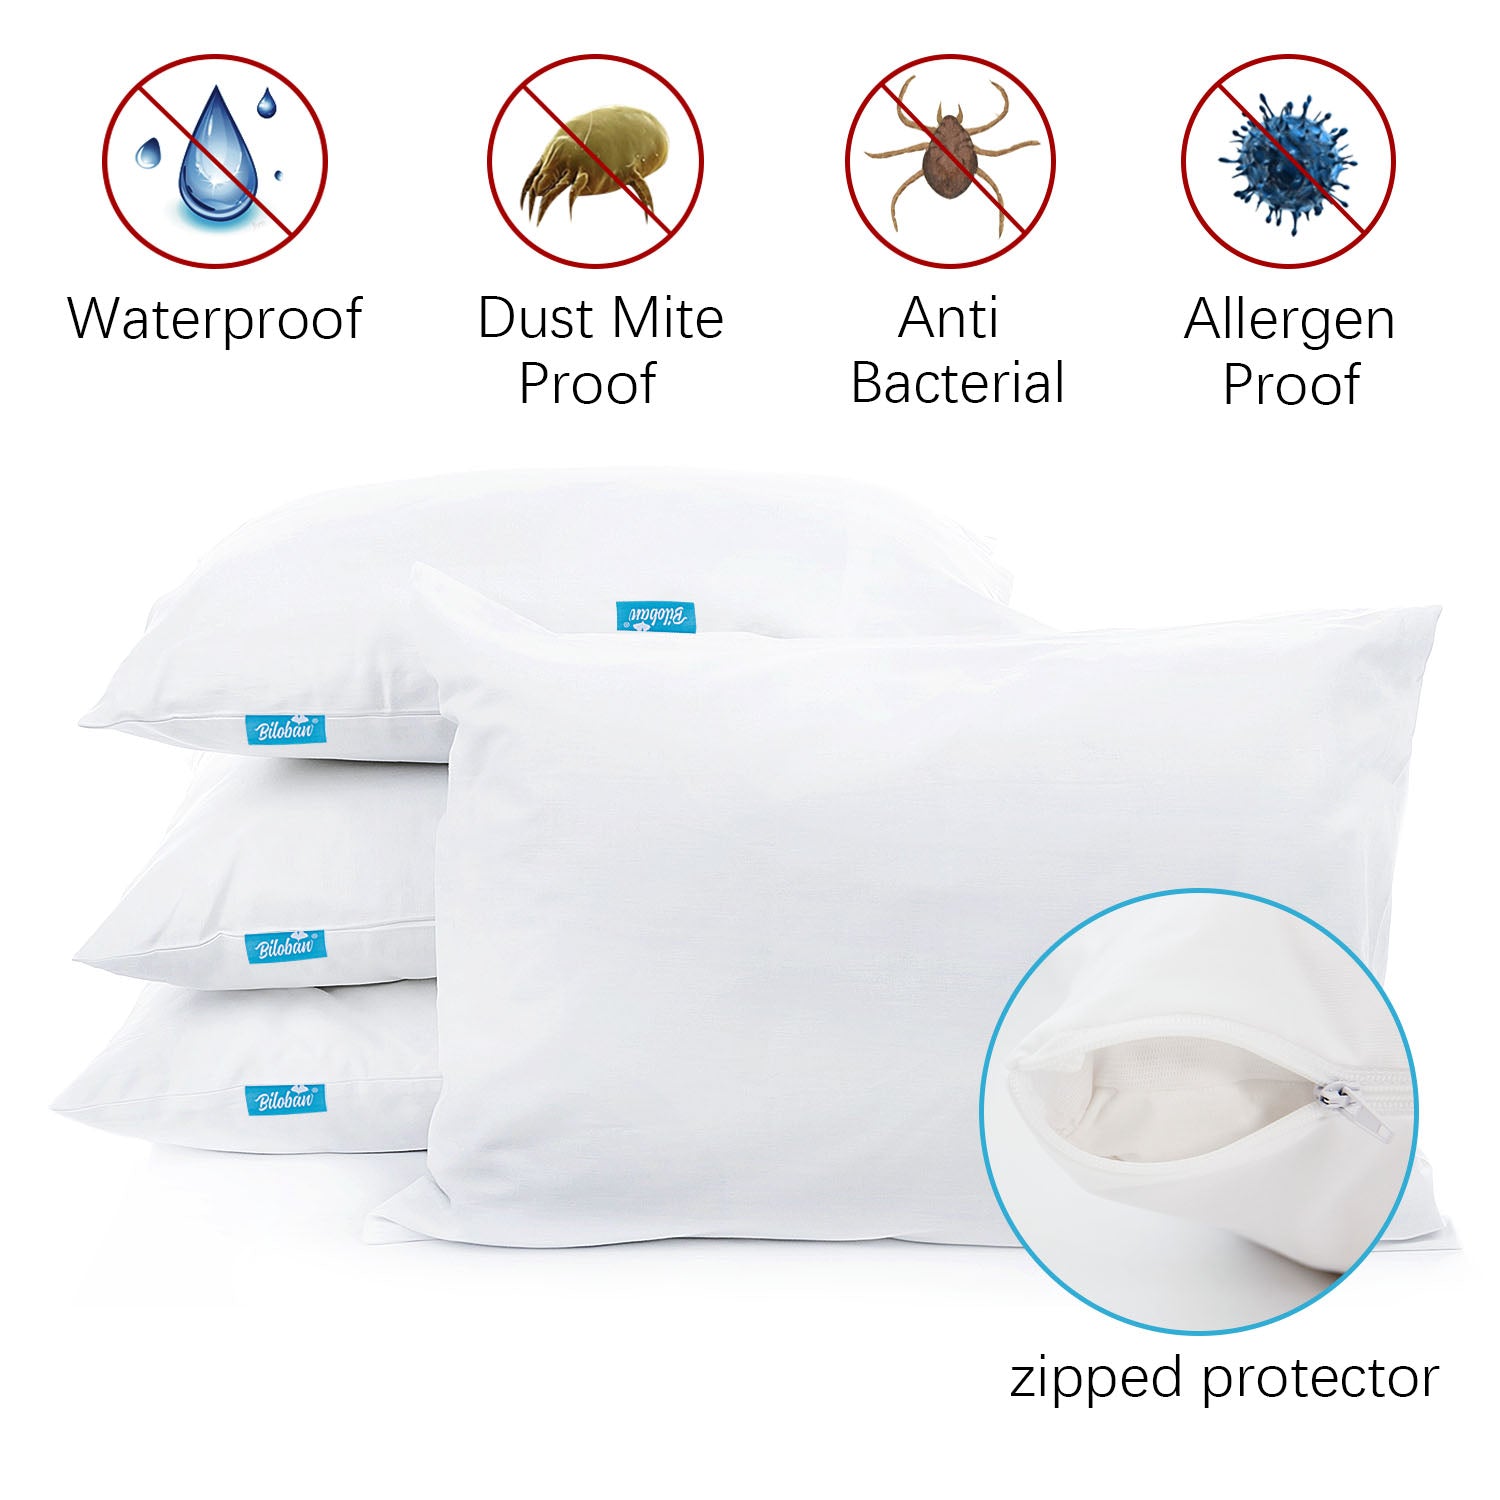 4 Pack Pillow Protectors - Polyester Knitted Fabric, Zippered,100% Wat